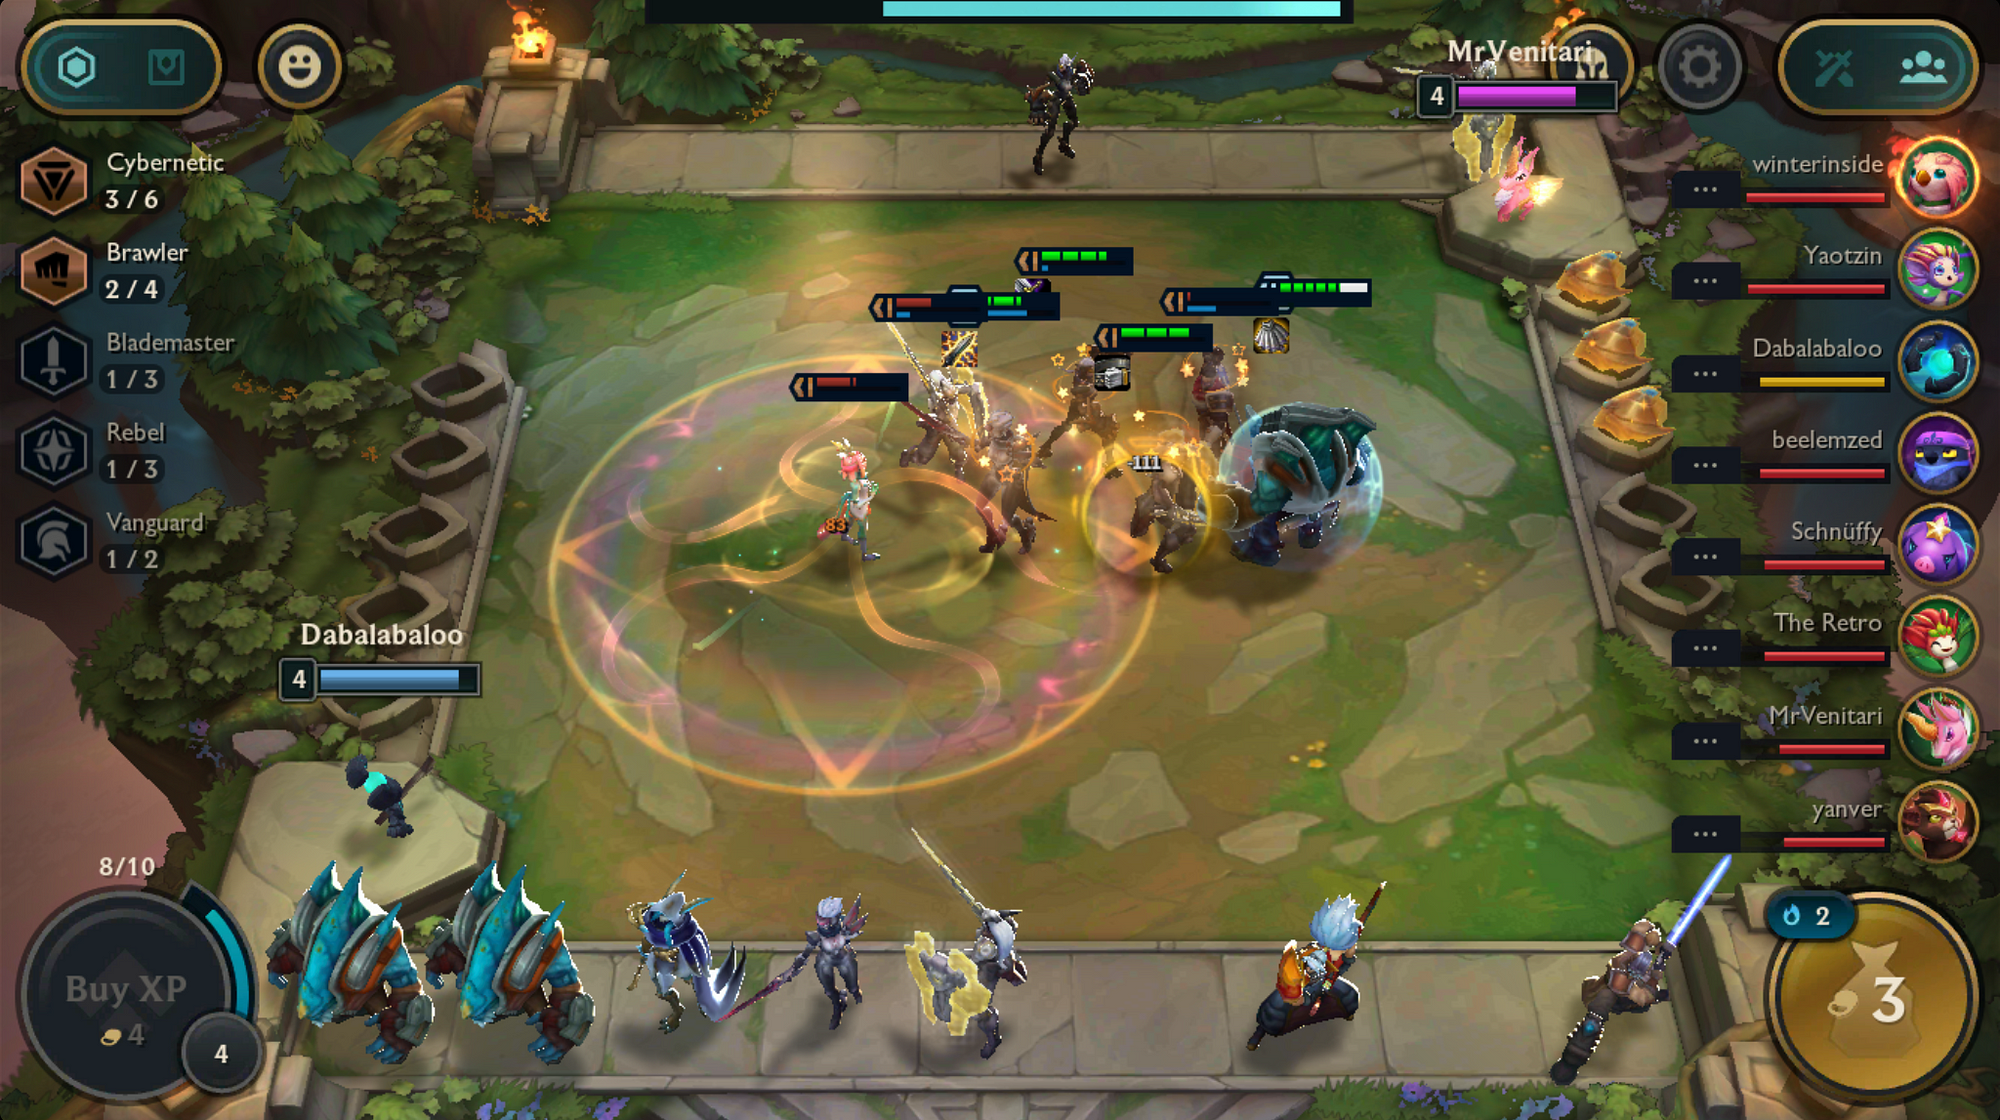 Riot Games revealed gameplay screenshots of League of Legends mobile  version